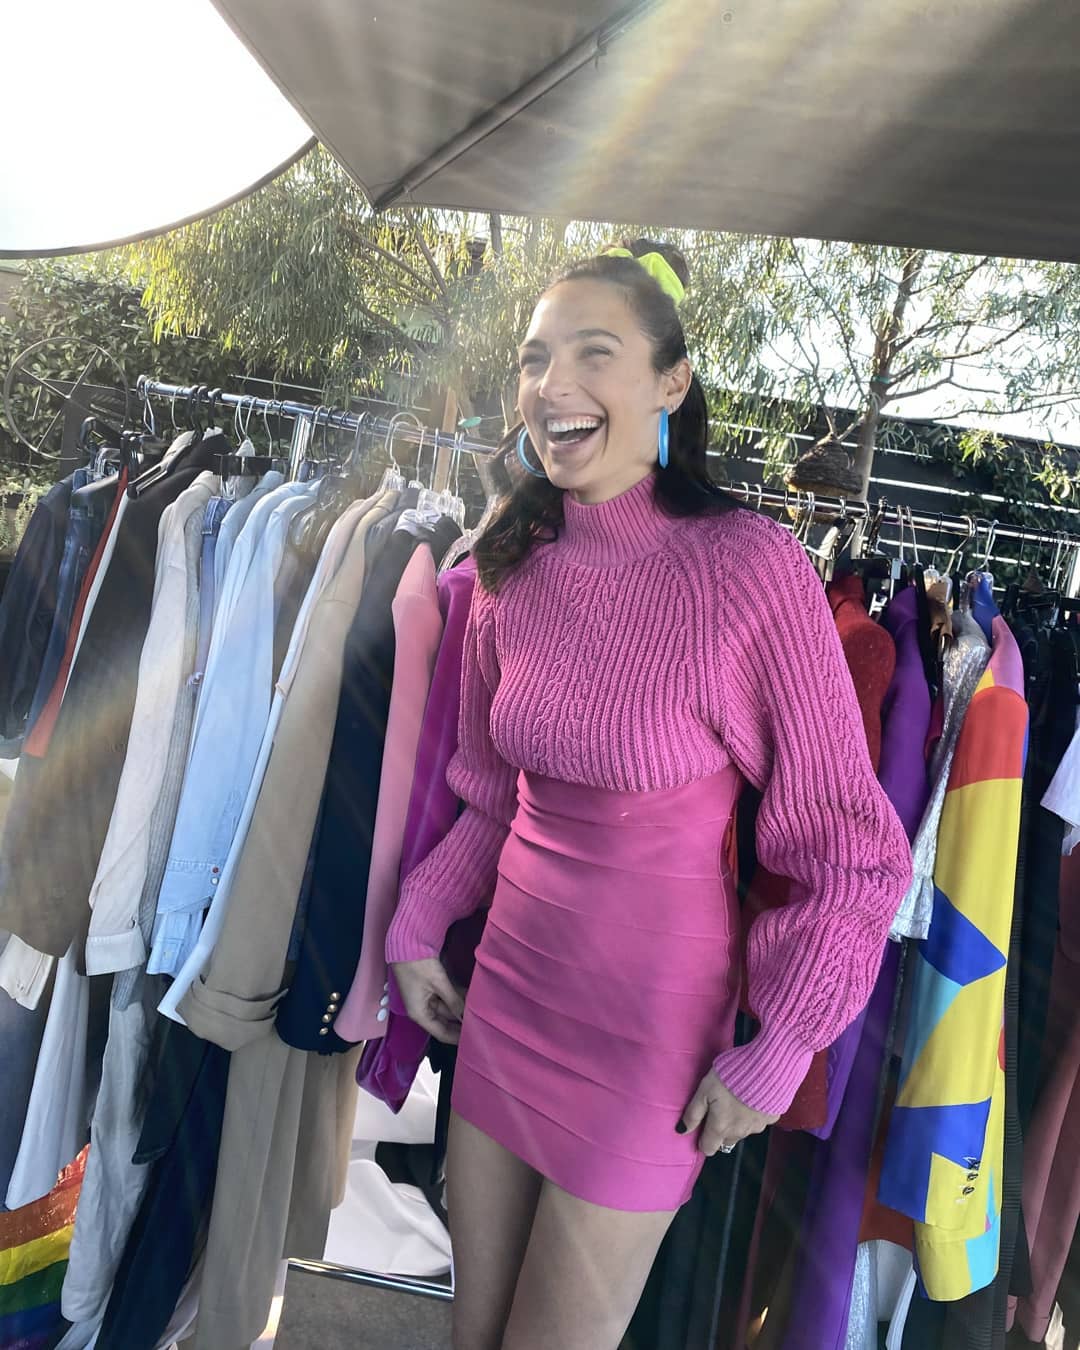 Gal Gadot Just Wants to Have Fun! - Photo 2